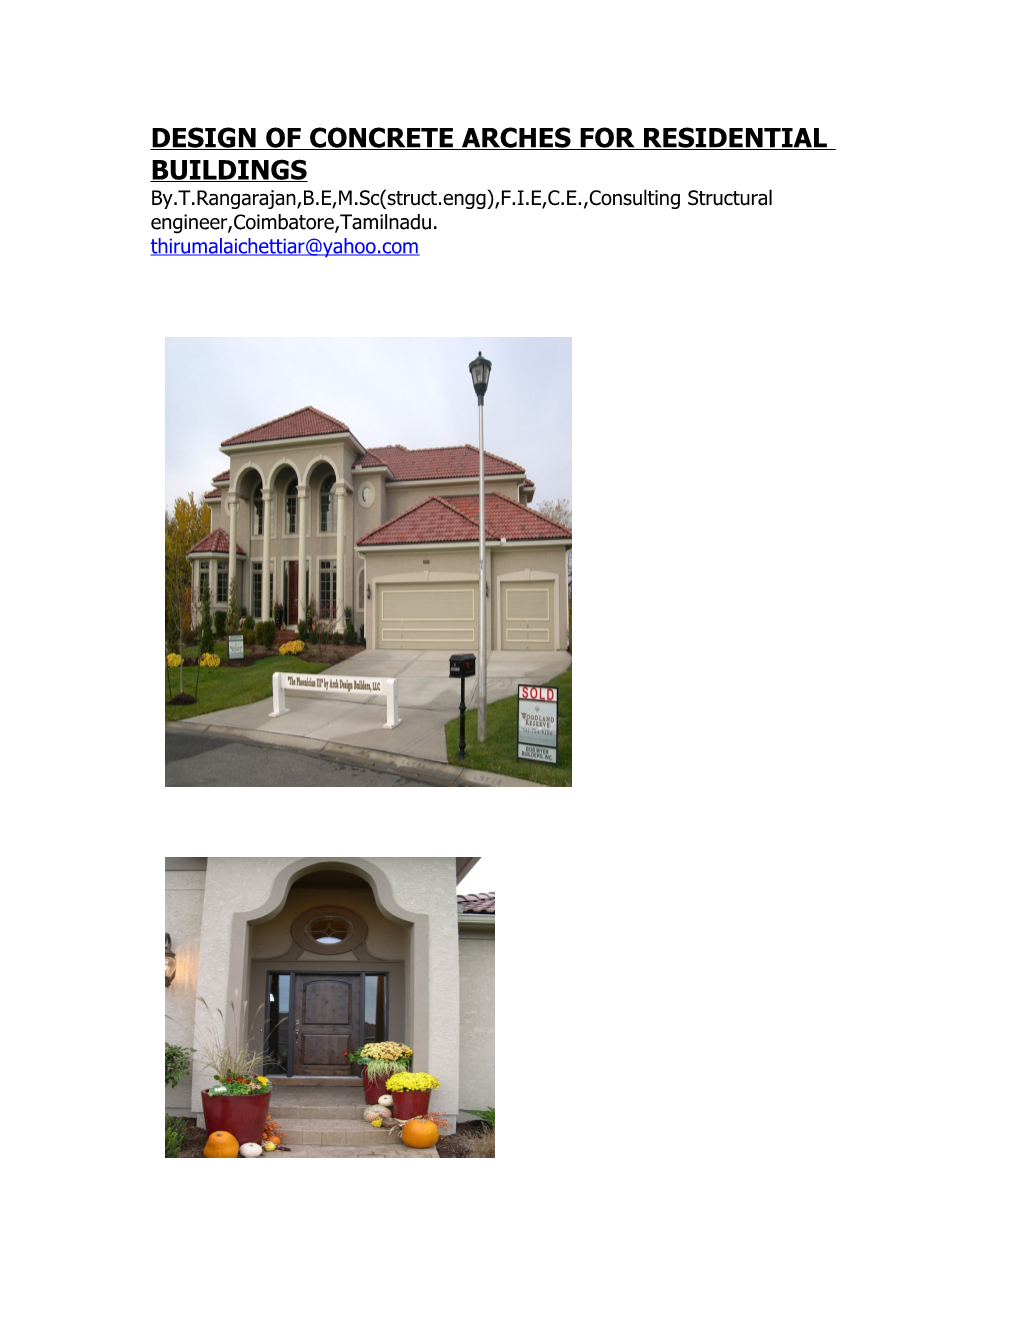 Design of Concrete Arches for Residential Buildings